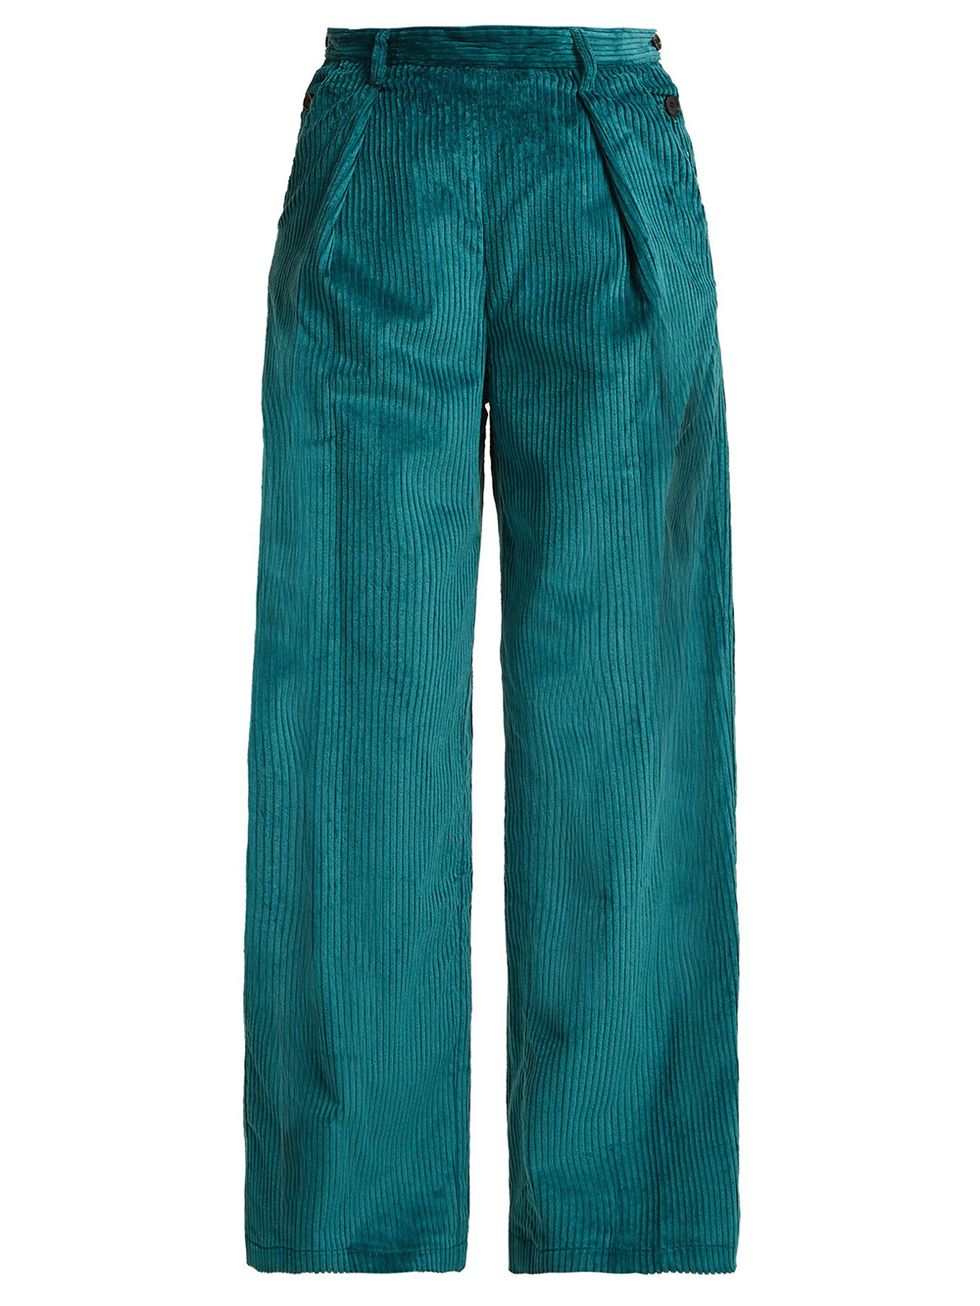 Clothing, Turquoise, Green, Trousers, Jeans, Active pants, Teal, Sportswear, Pocket, Denim, 